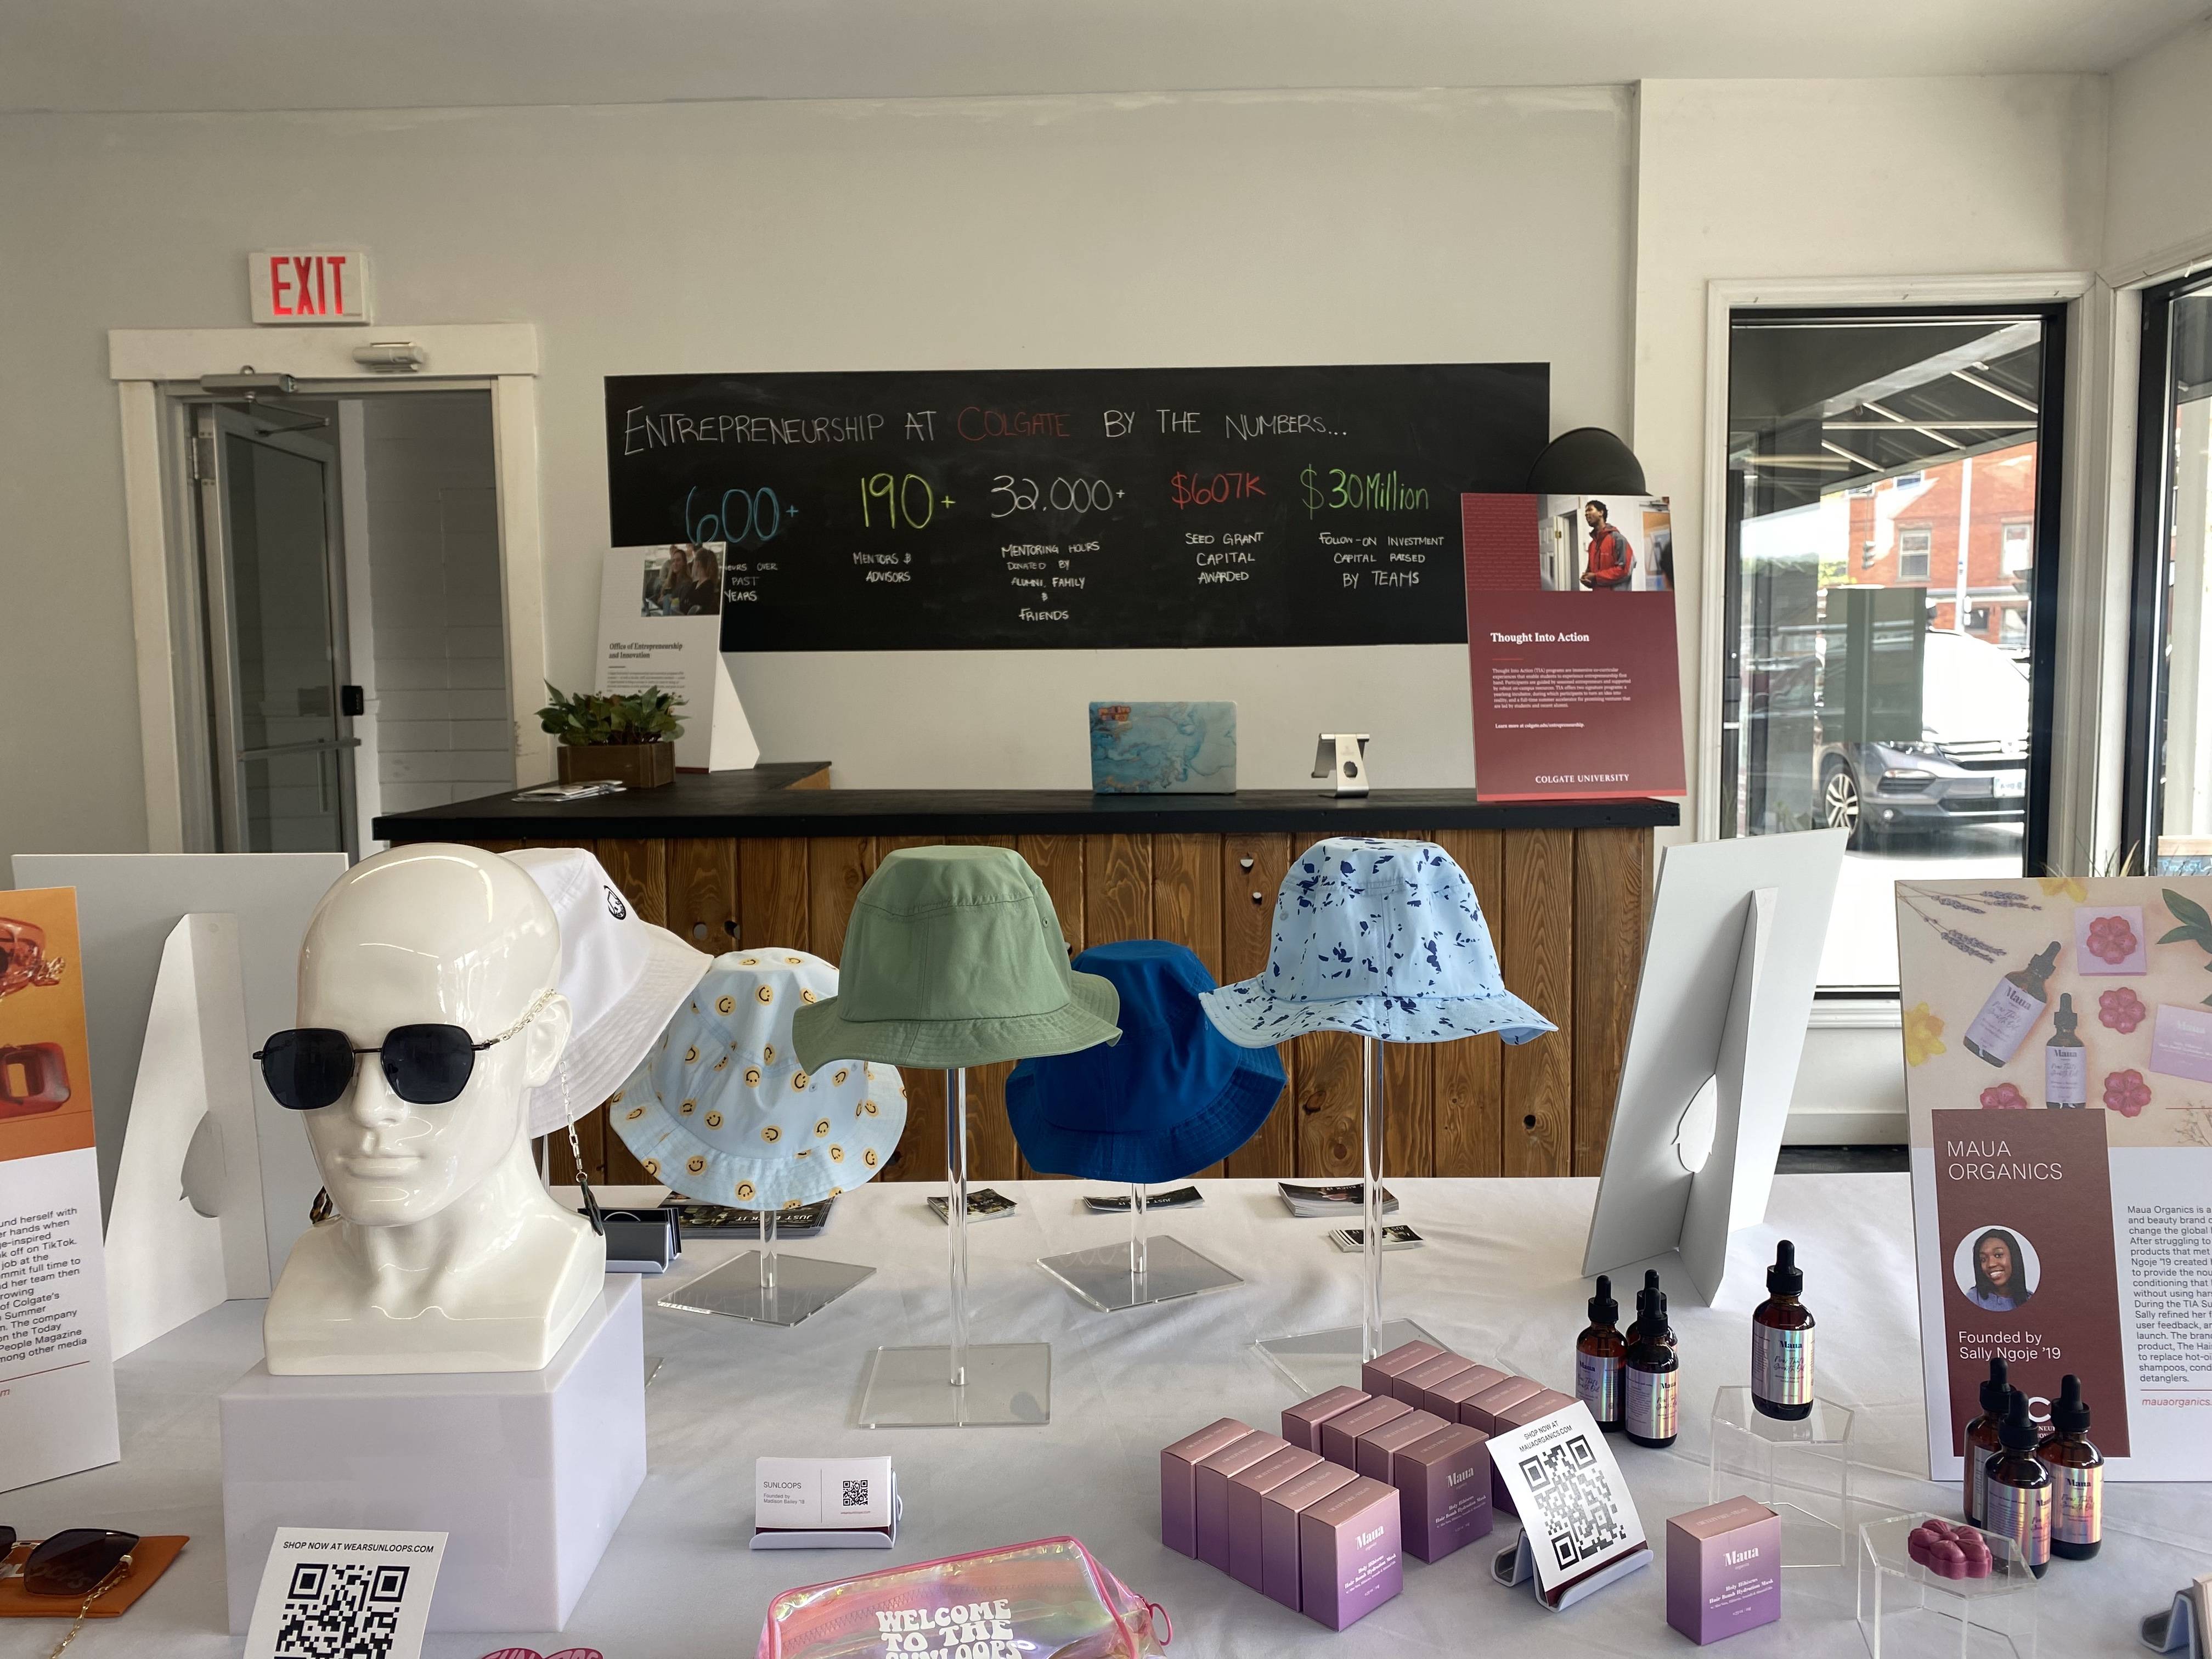 View of the interior of the pop-up shop